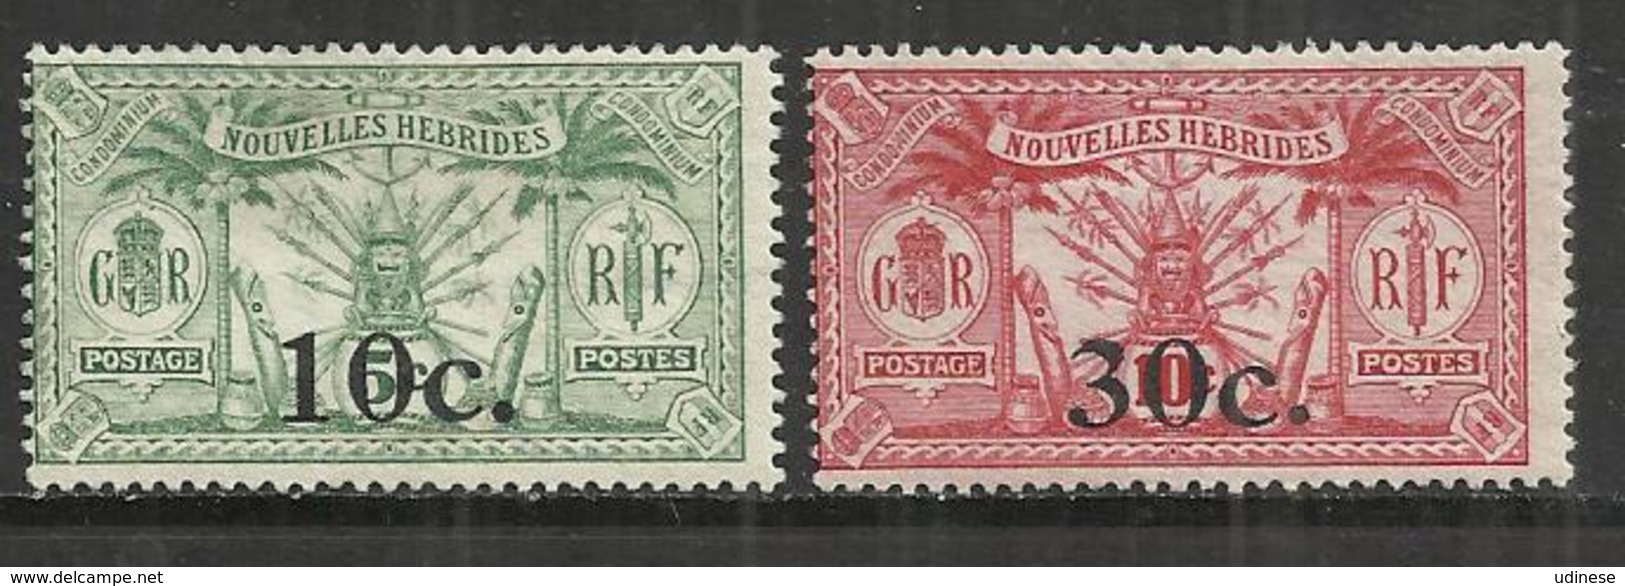 NOUVELLE HEBRIDES 1920 - INDIGENOUS IDOL - OVERPRINTED -  LOT OF 2 DIFFERENT - MNH NEUF MINT NUEVO - Unused Stamps